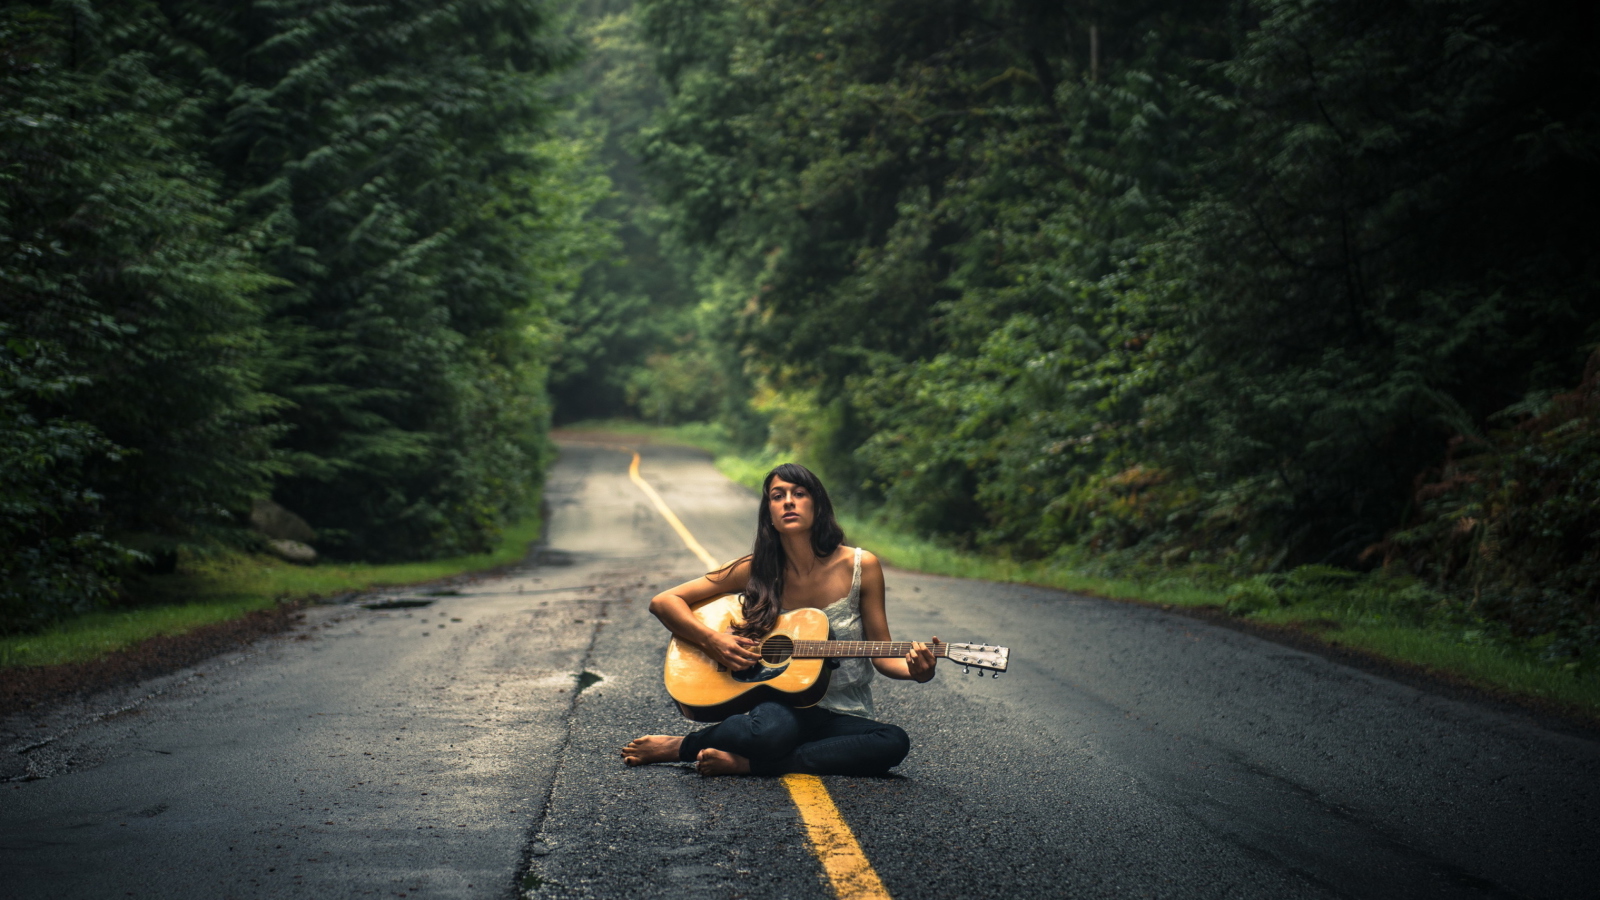 Girl Playing Guitar On Countryside Road wallpaper 1600x900